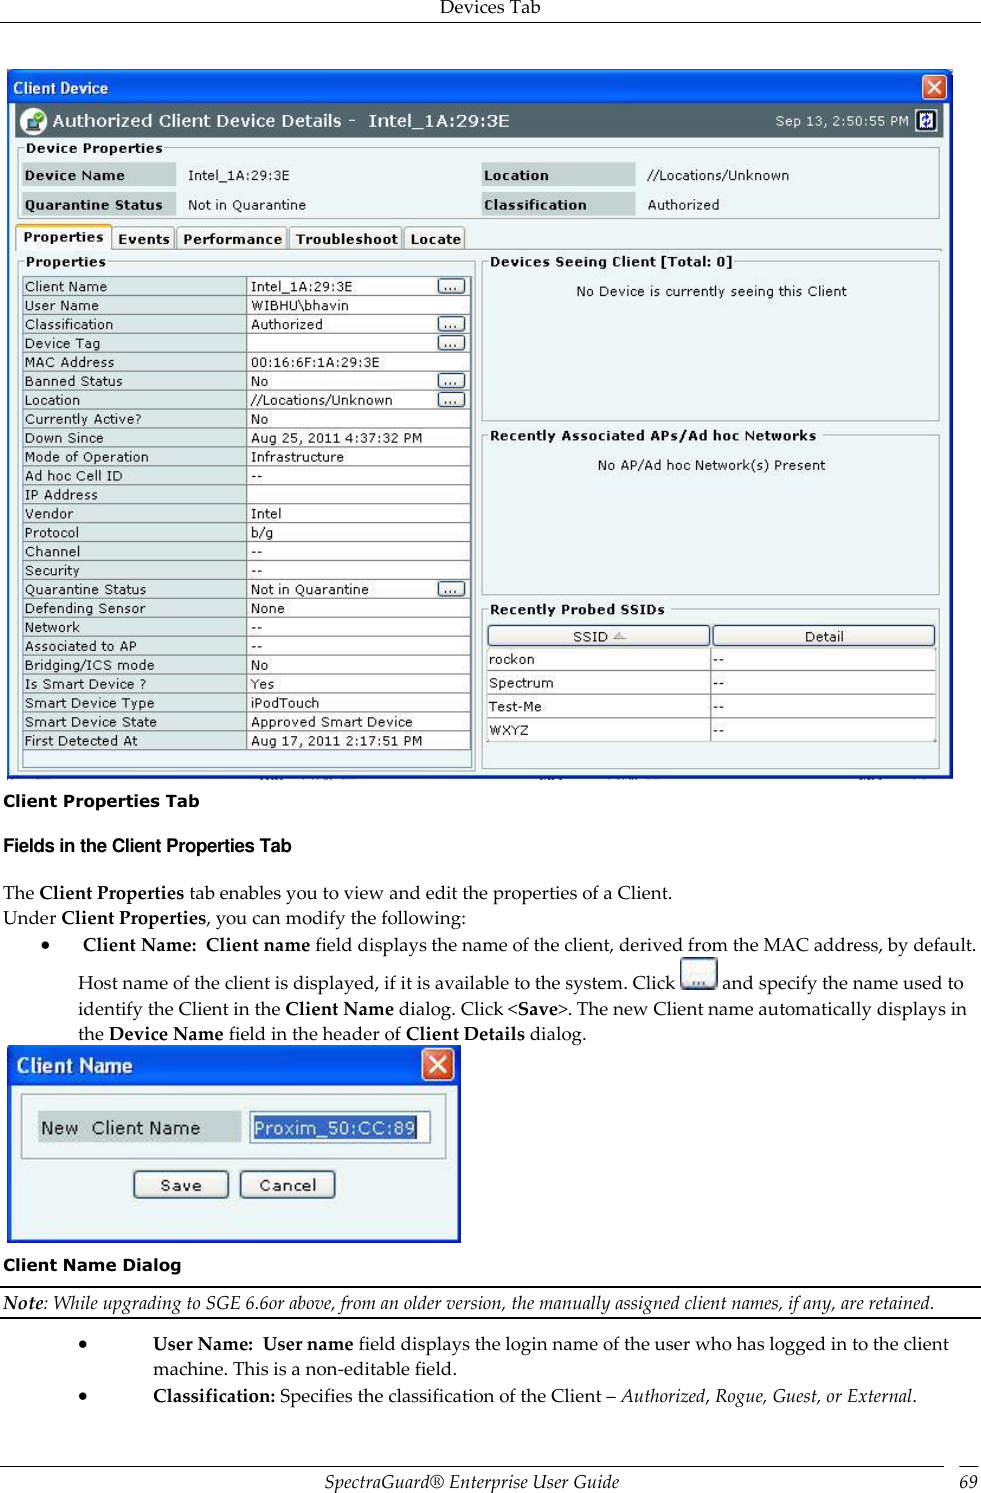 Devices Tab SpectraGuard®  Enterprise User Guide 69    Client Properties Tab Fields in the Client Properties Tab The Client Properties tab enables you to view and edit the properties of a Client. Under Client Properties, you can modify the following:   Client Name:  Client name field displays the name of the client, derived from the MAC address, by default. Host name of the client is displayed, if it is available to the system. Click   and specify the name used to identify the Client in the Client Name dialog. Click &lt;Save&gt;. The new Client name automatically displays in the Device Name field in the header of Client Details dialog.    Client Name Dialog Note: While upgrading to SGE 6.6or above, from an older version, the manually assigned client names, if any, are retained.  User Name:  User name field displays the login name of the user who has logged in to the client machine. This is a non-editable field.  Classification: Specifies the classification of the Client – Authorized, Rogue, Guest, or External. 